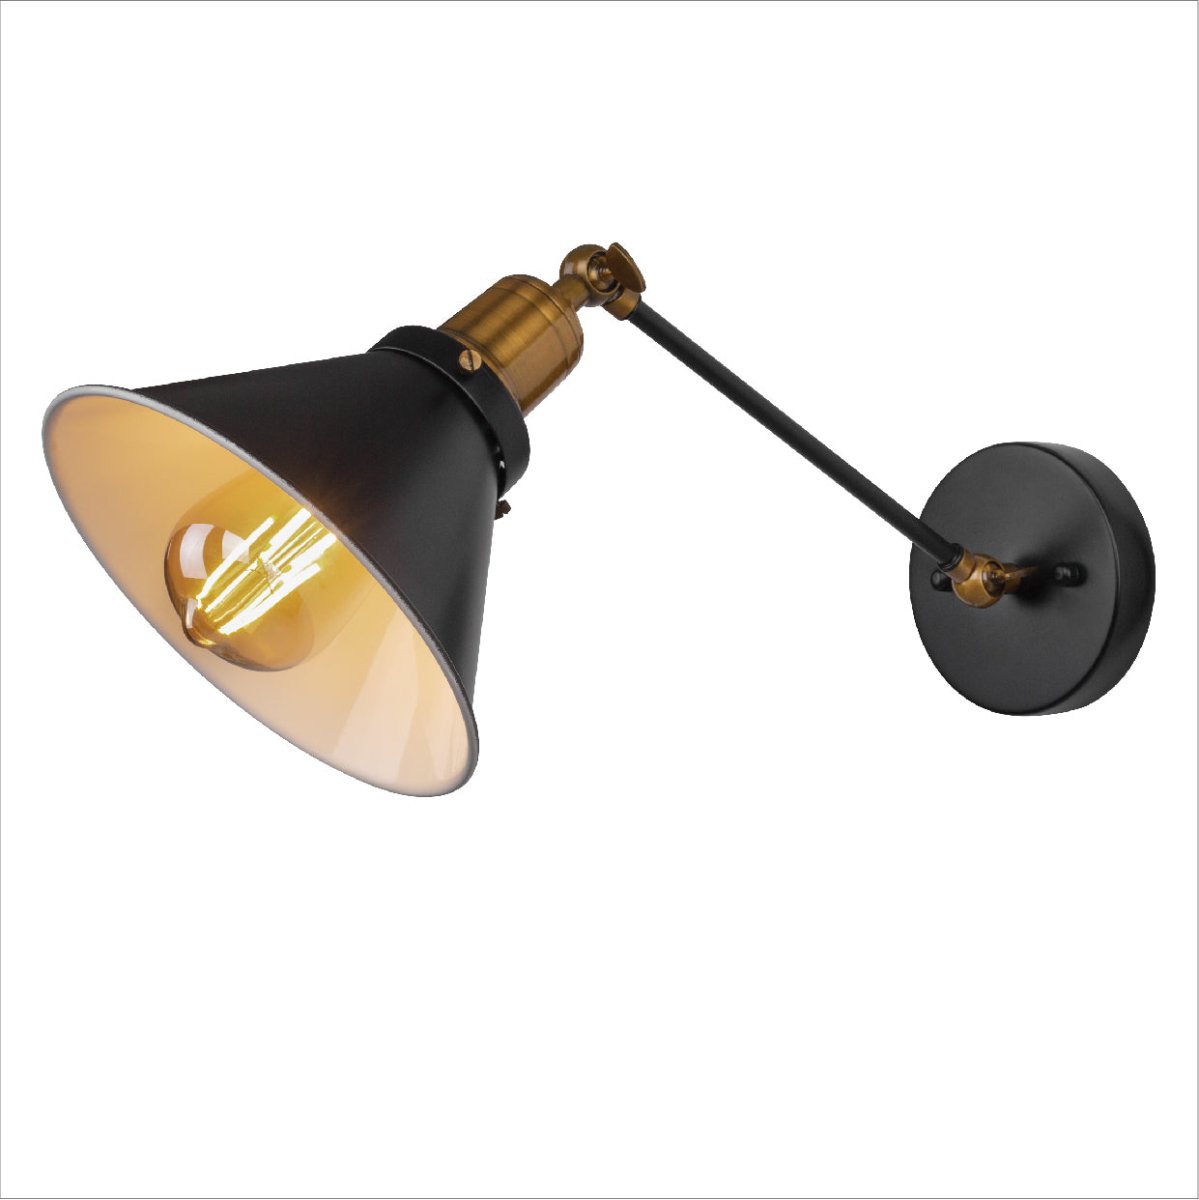 Main image of Black Antique Brass Metal Funnel Hinged Wall Light with E27 Fitting | TEKLED 151-19642